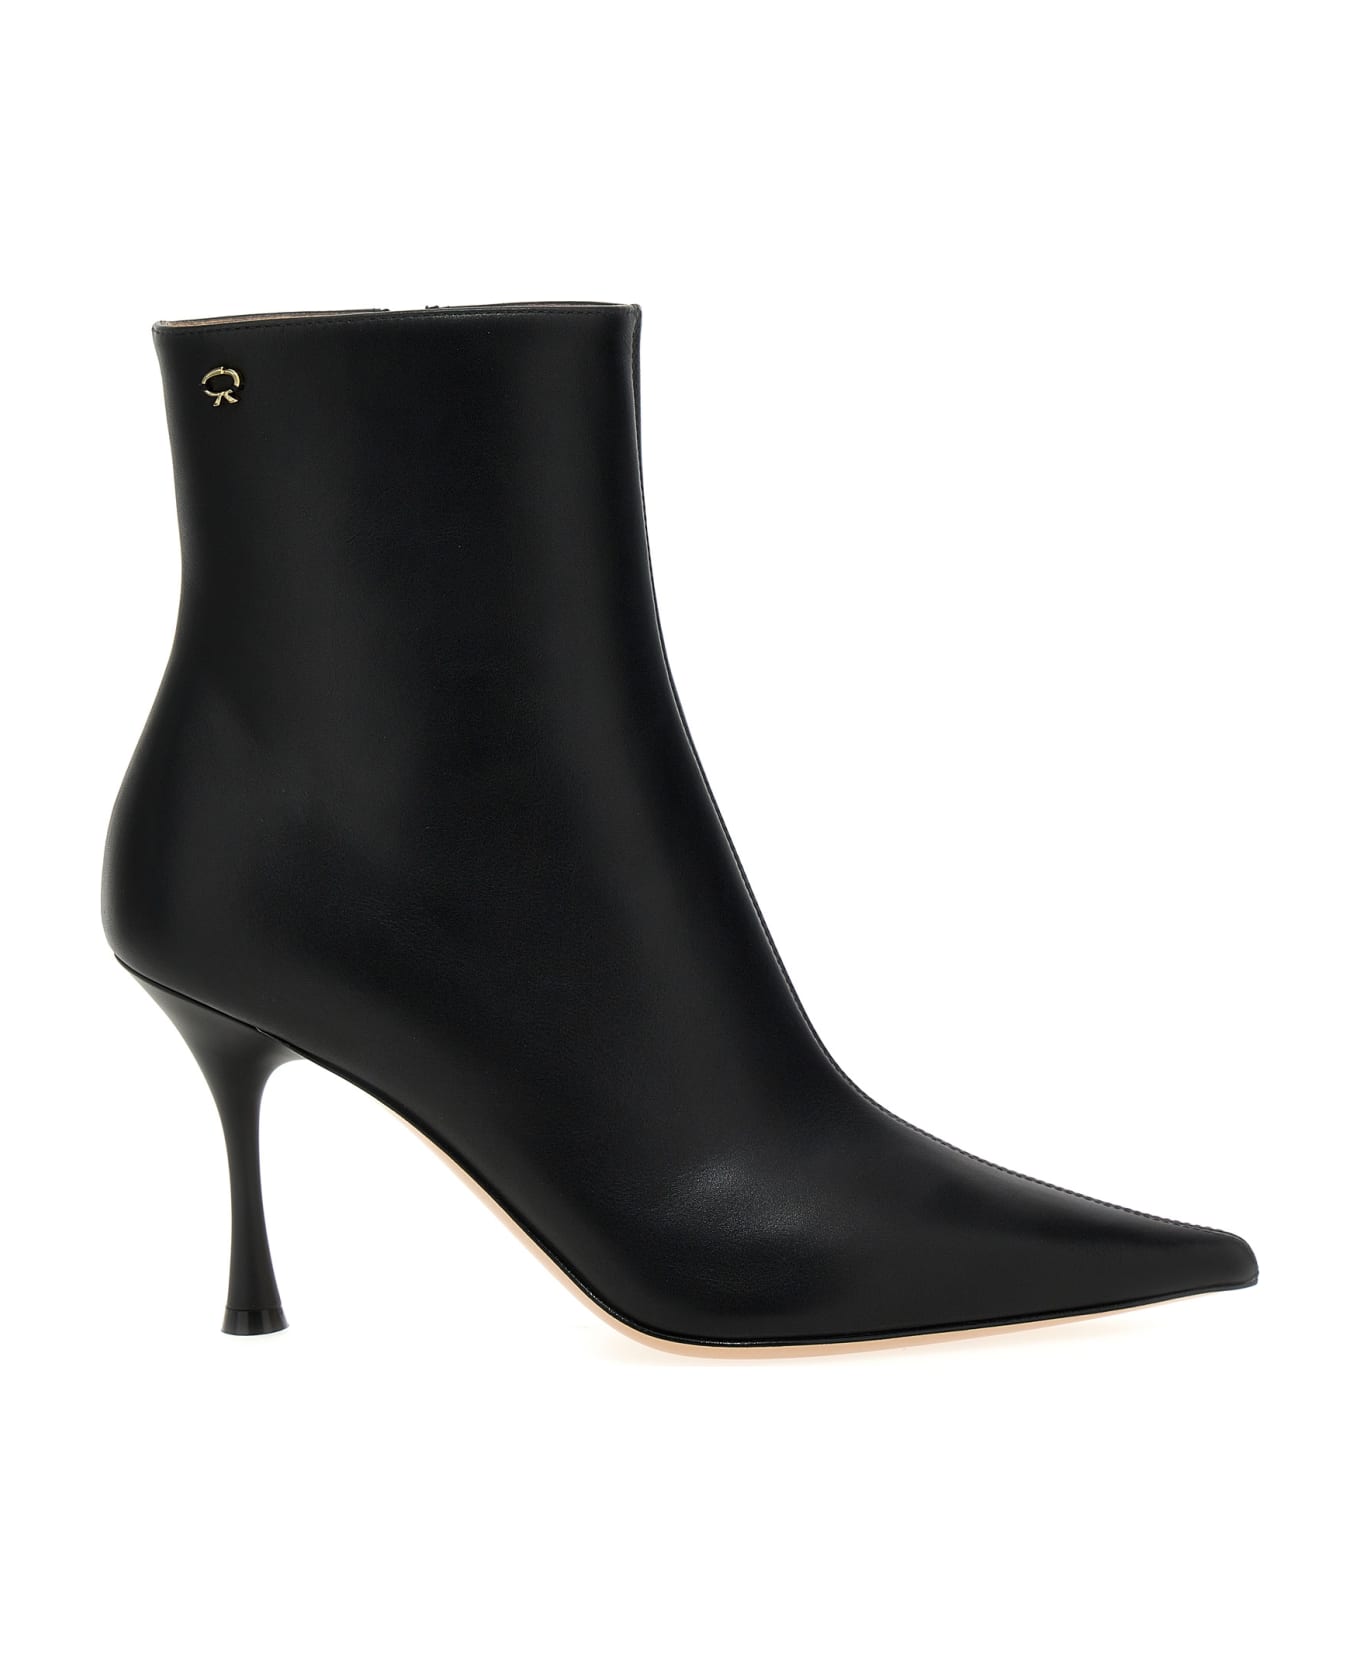 Gianvito Rossi Leather Ankle Boots - Black   ブーツ